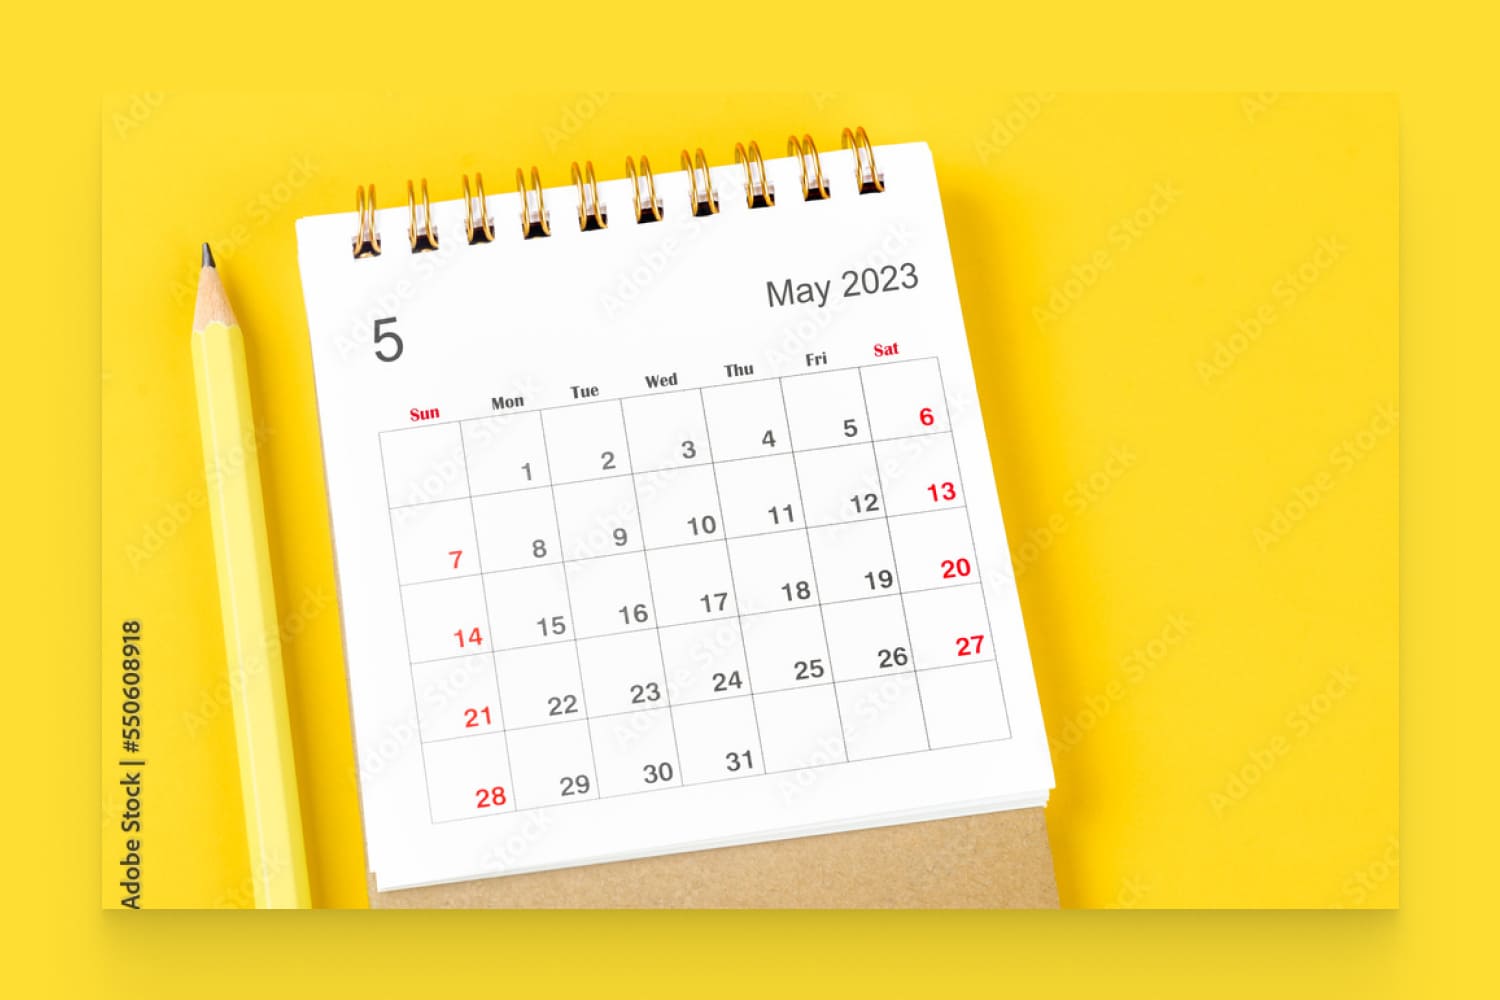 he May 2023 Monthly desk calendar for 2023 with pencil on yellow background.